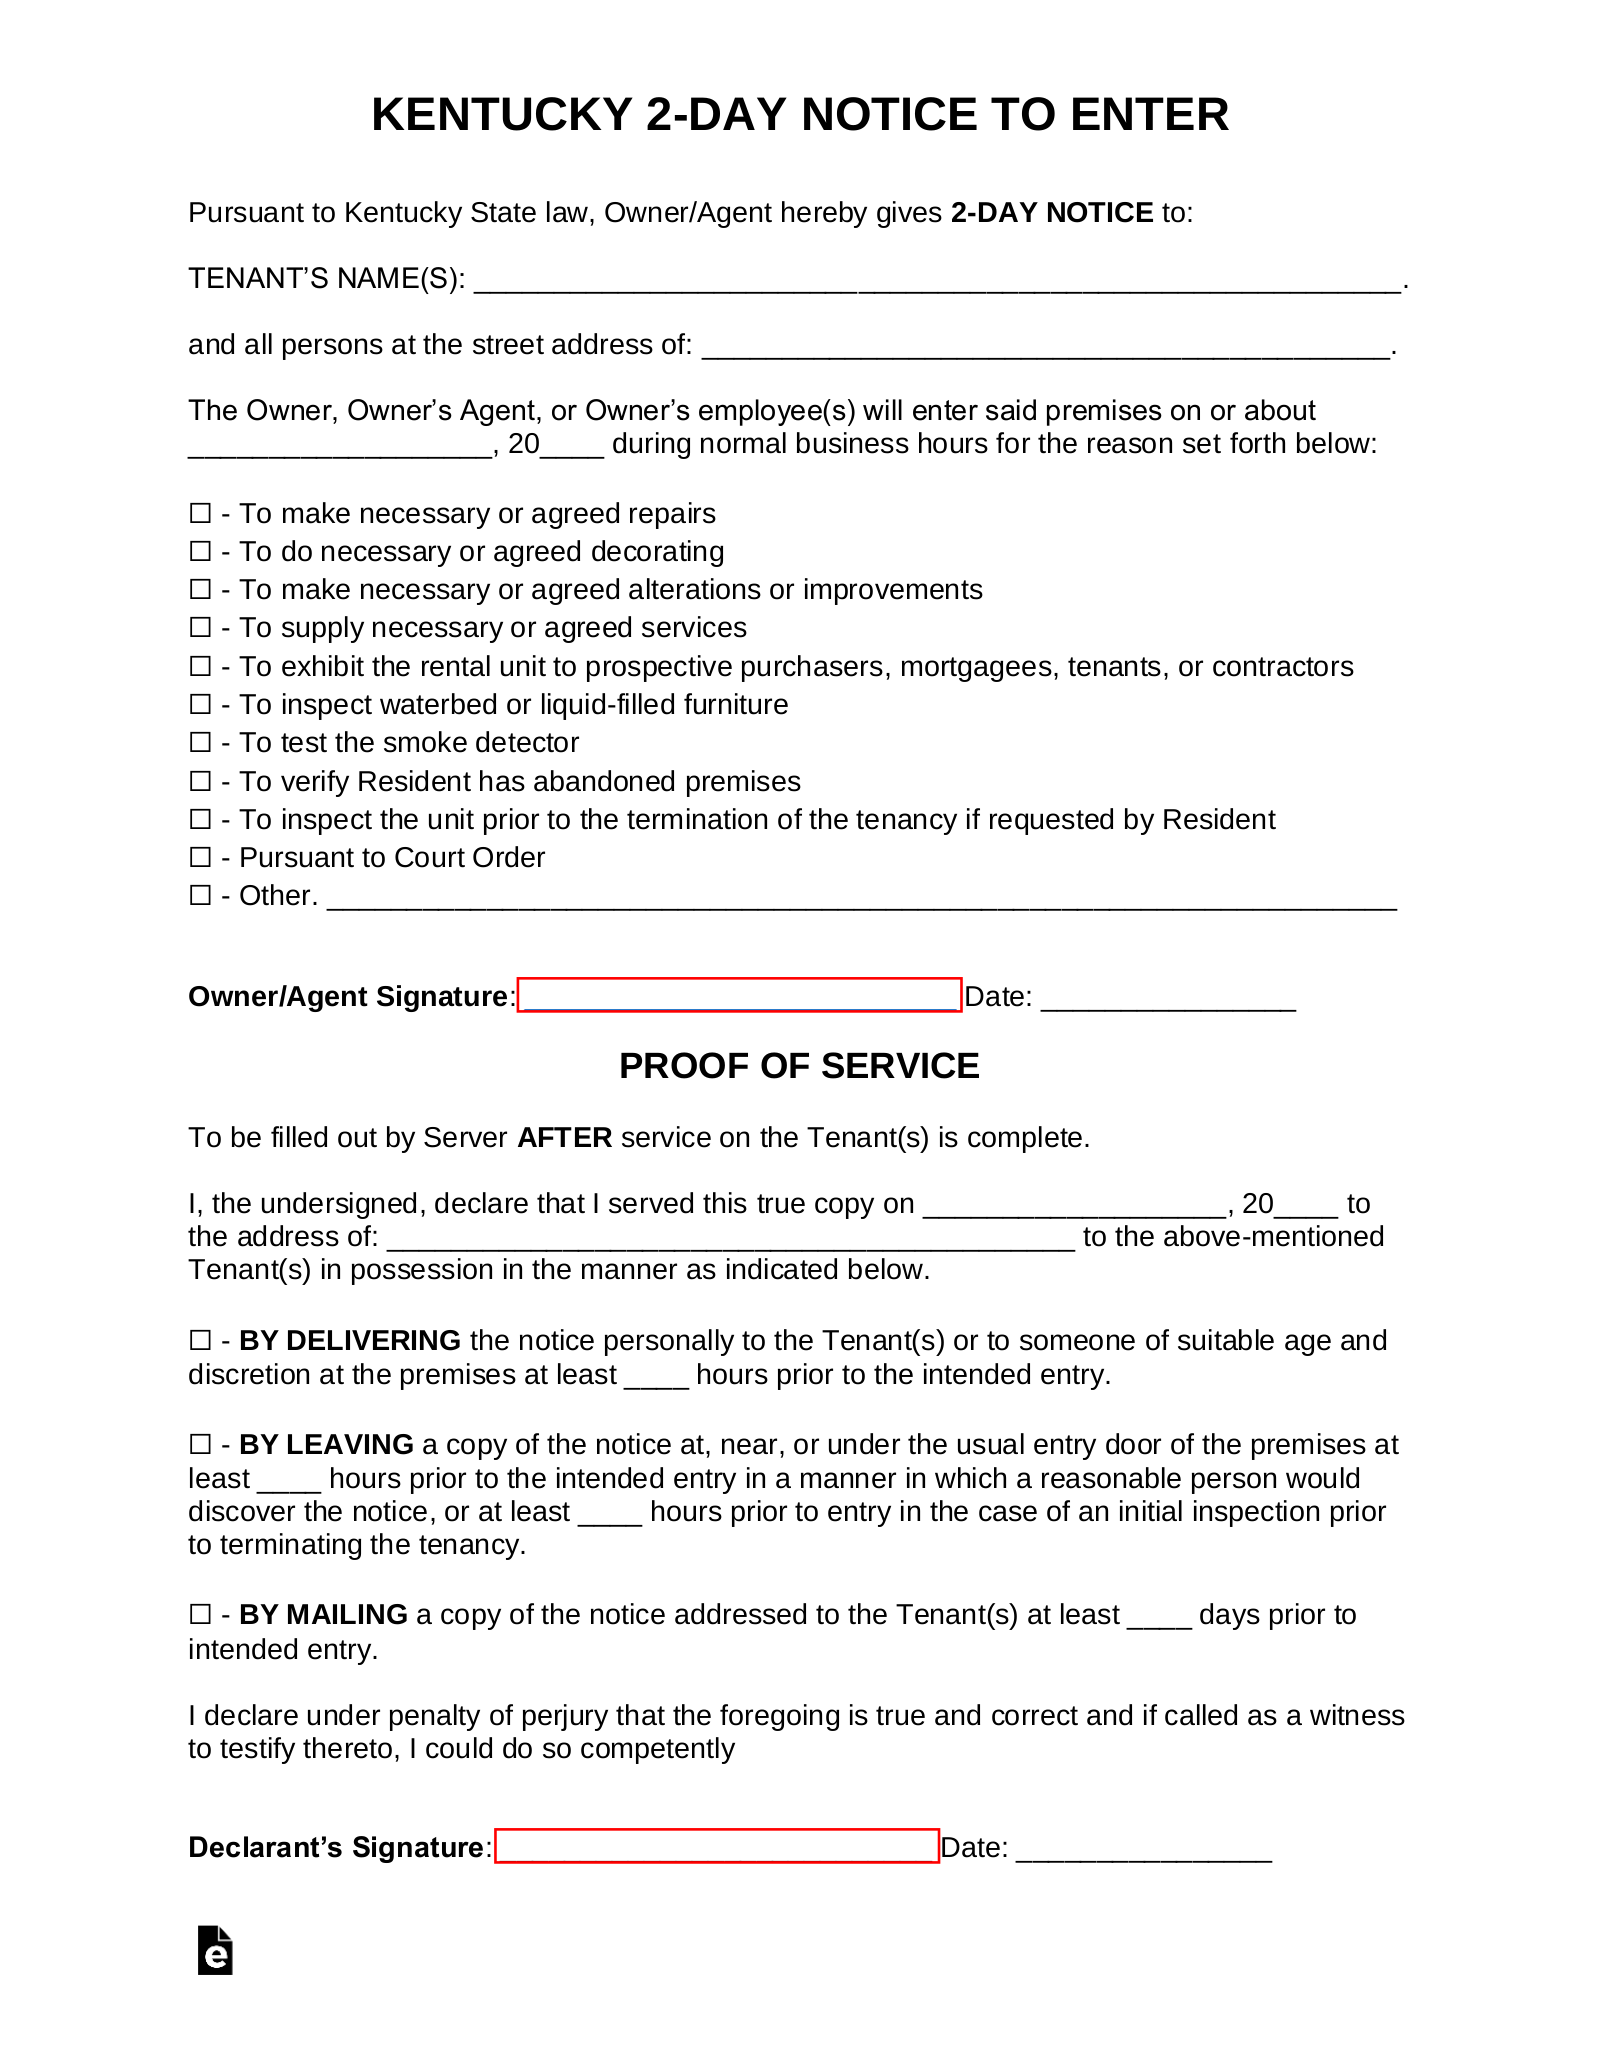 Kentucky 2-Day Landlord Notice to Enter Form